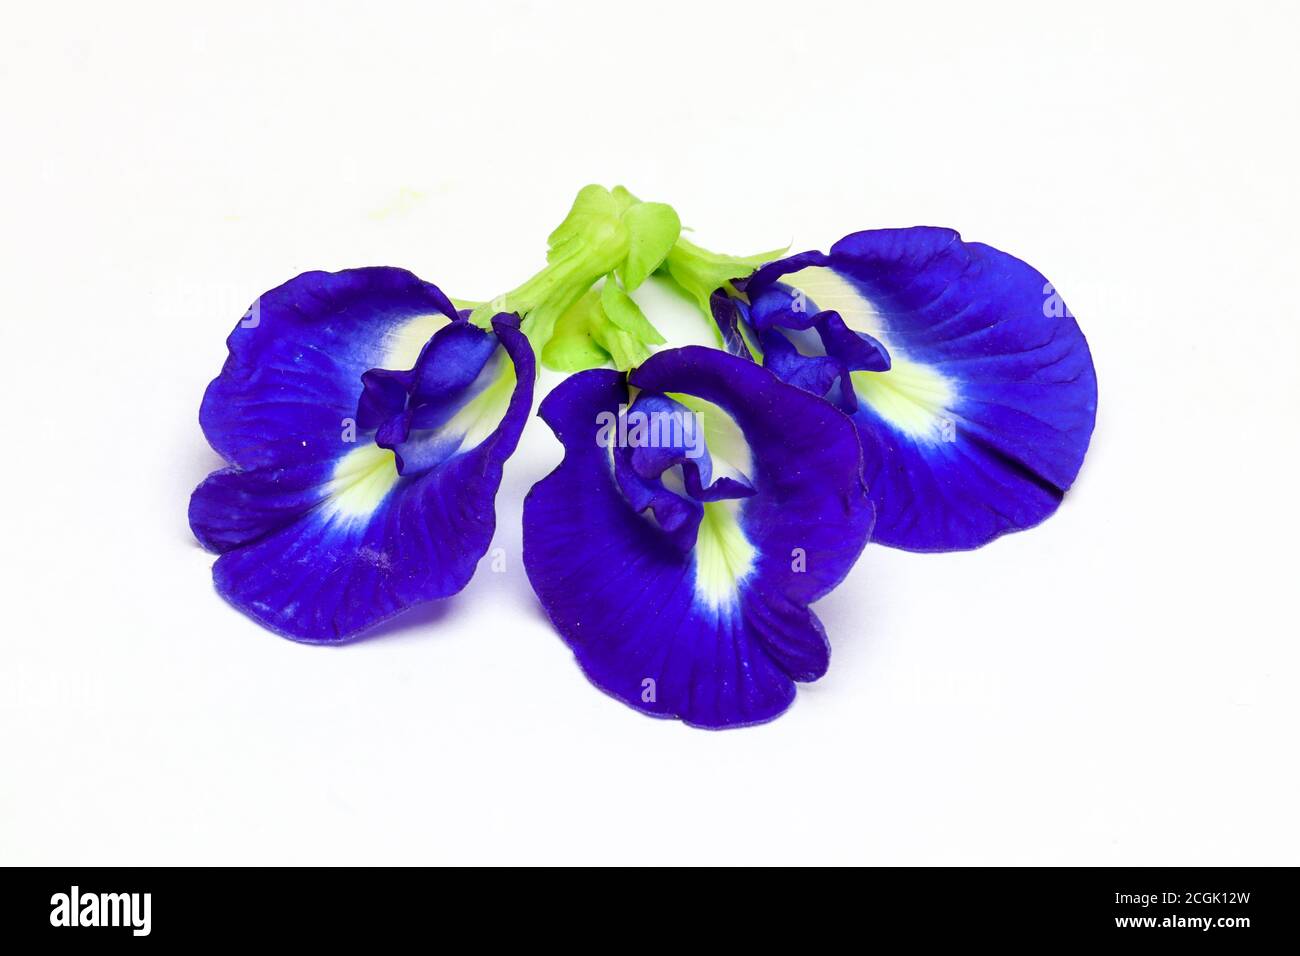 four purple pea butterflies isolated on white background Stock Photo